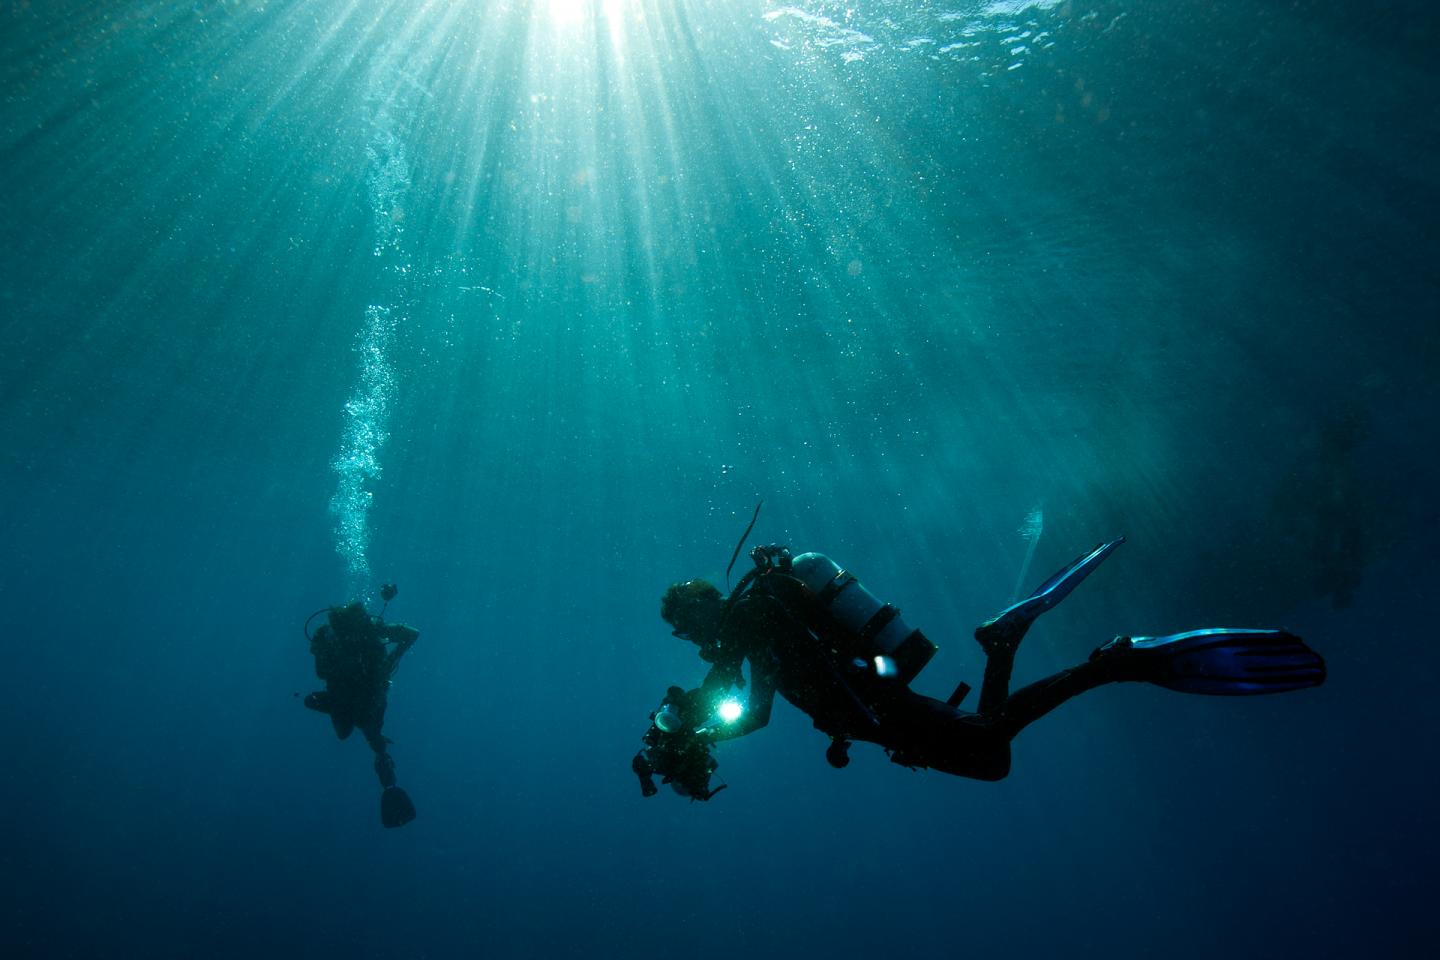 Divers on the Global Reef Expedition Mission to the Solomon Islands